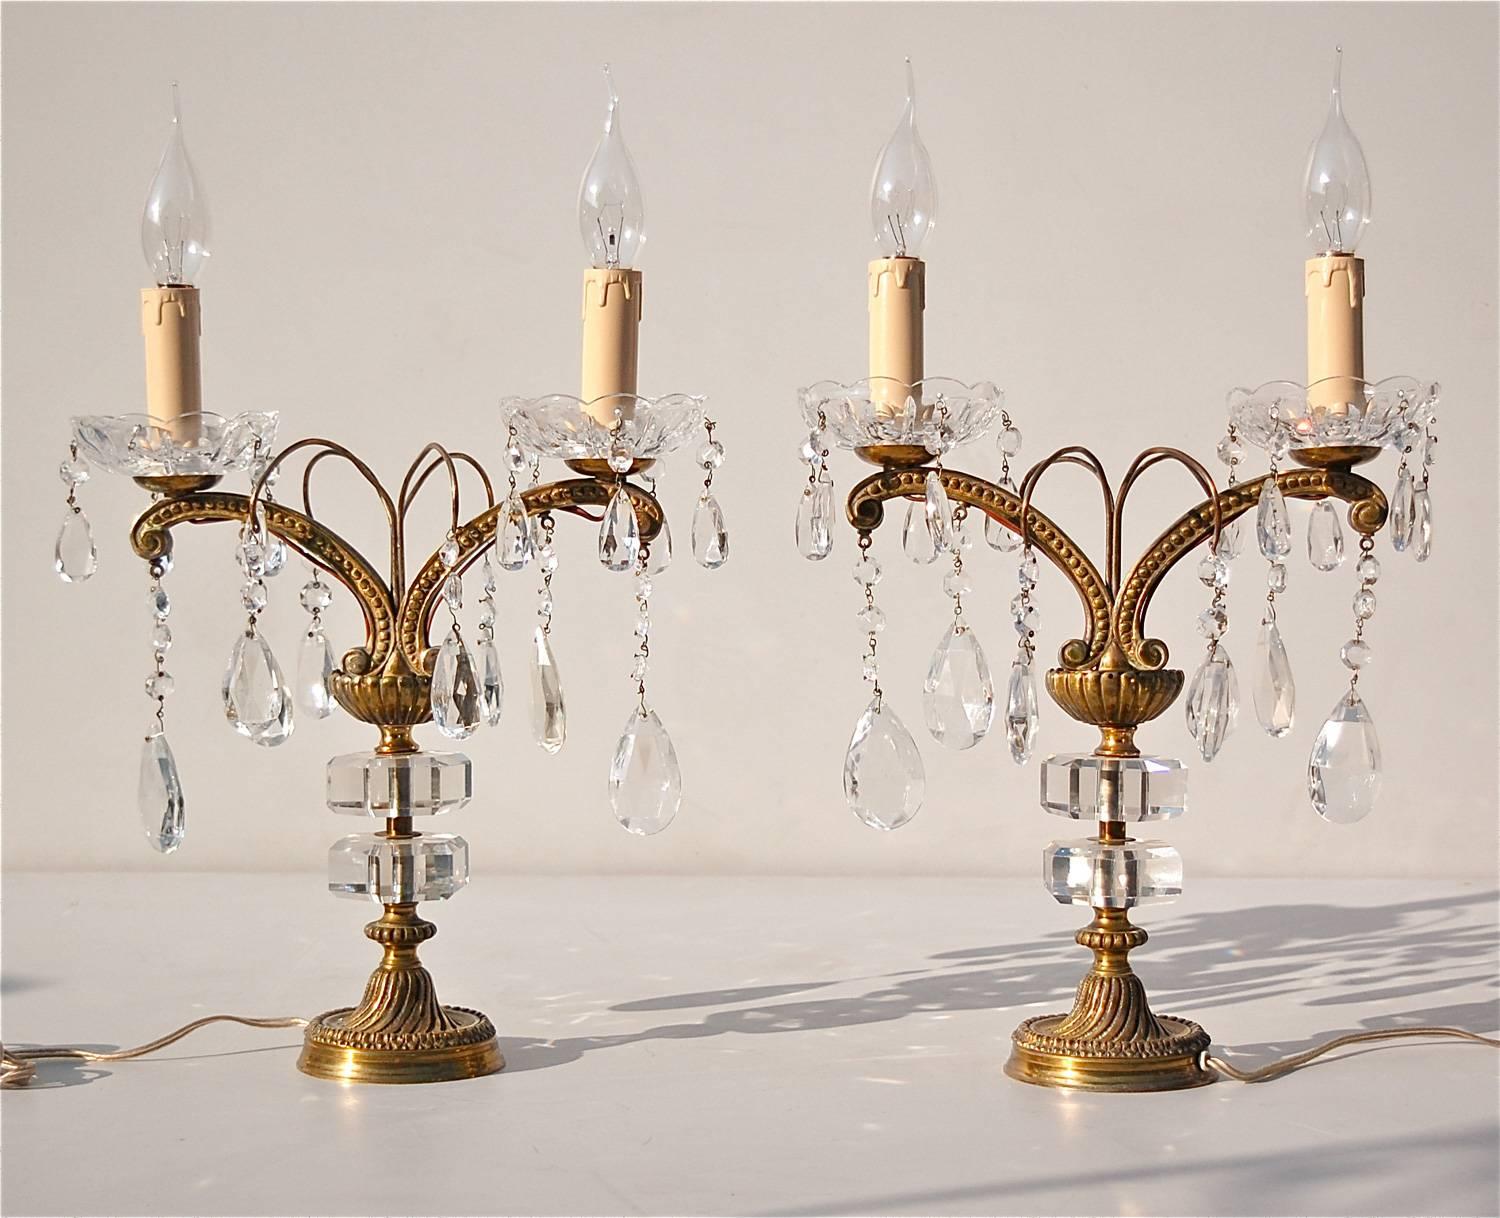 French Pair of Candlestick Table Lamps with Usual Crystal Detail, 1950s France For Sale